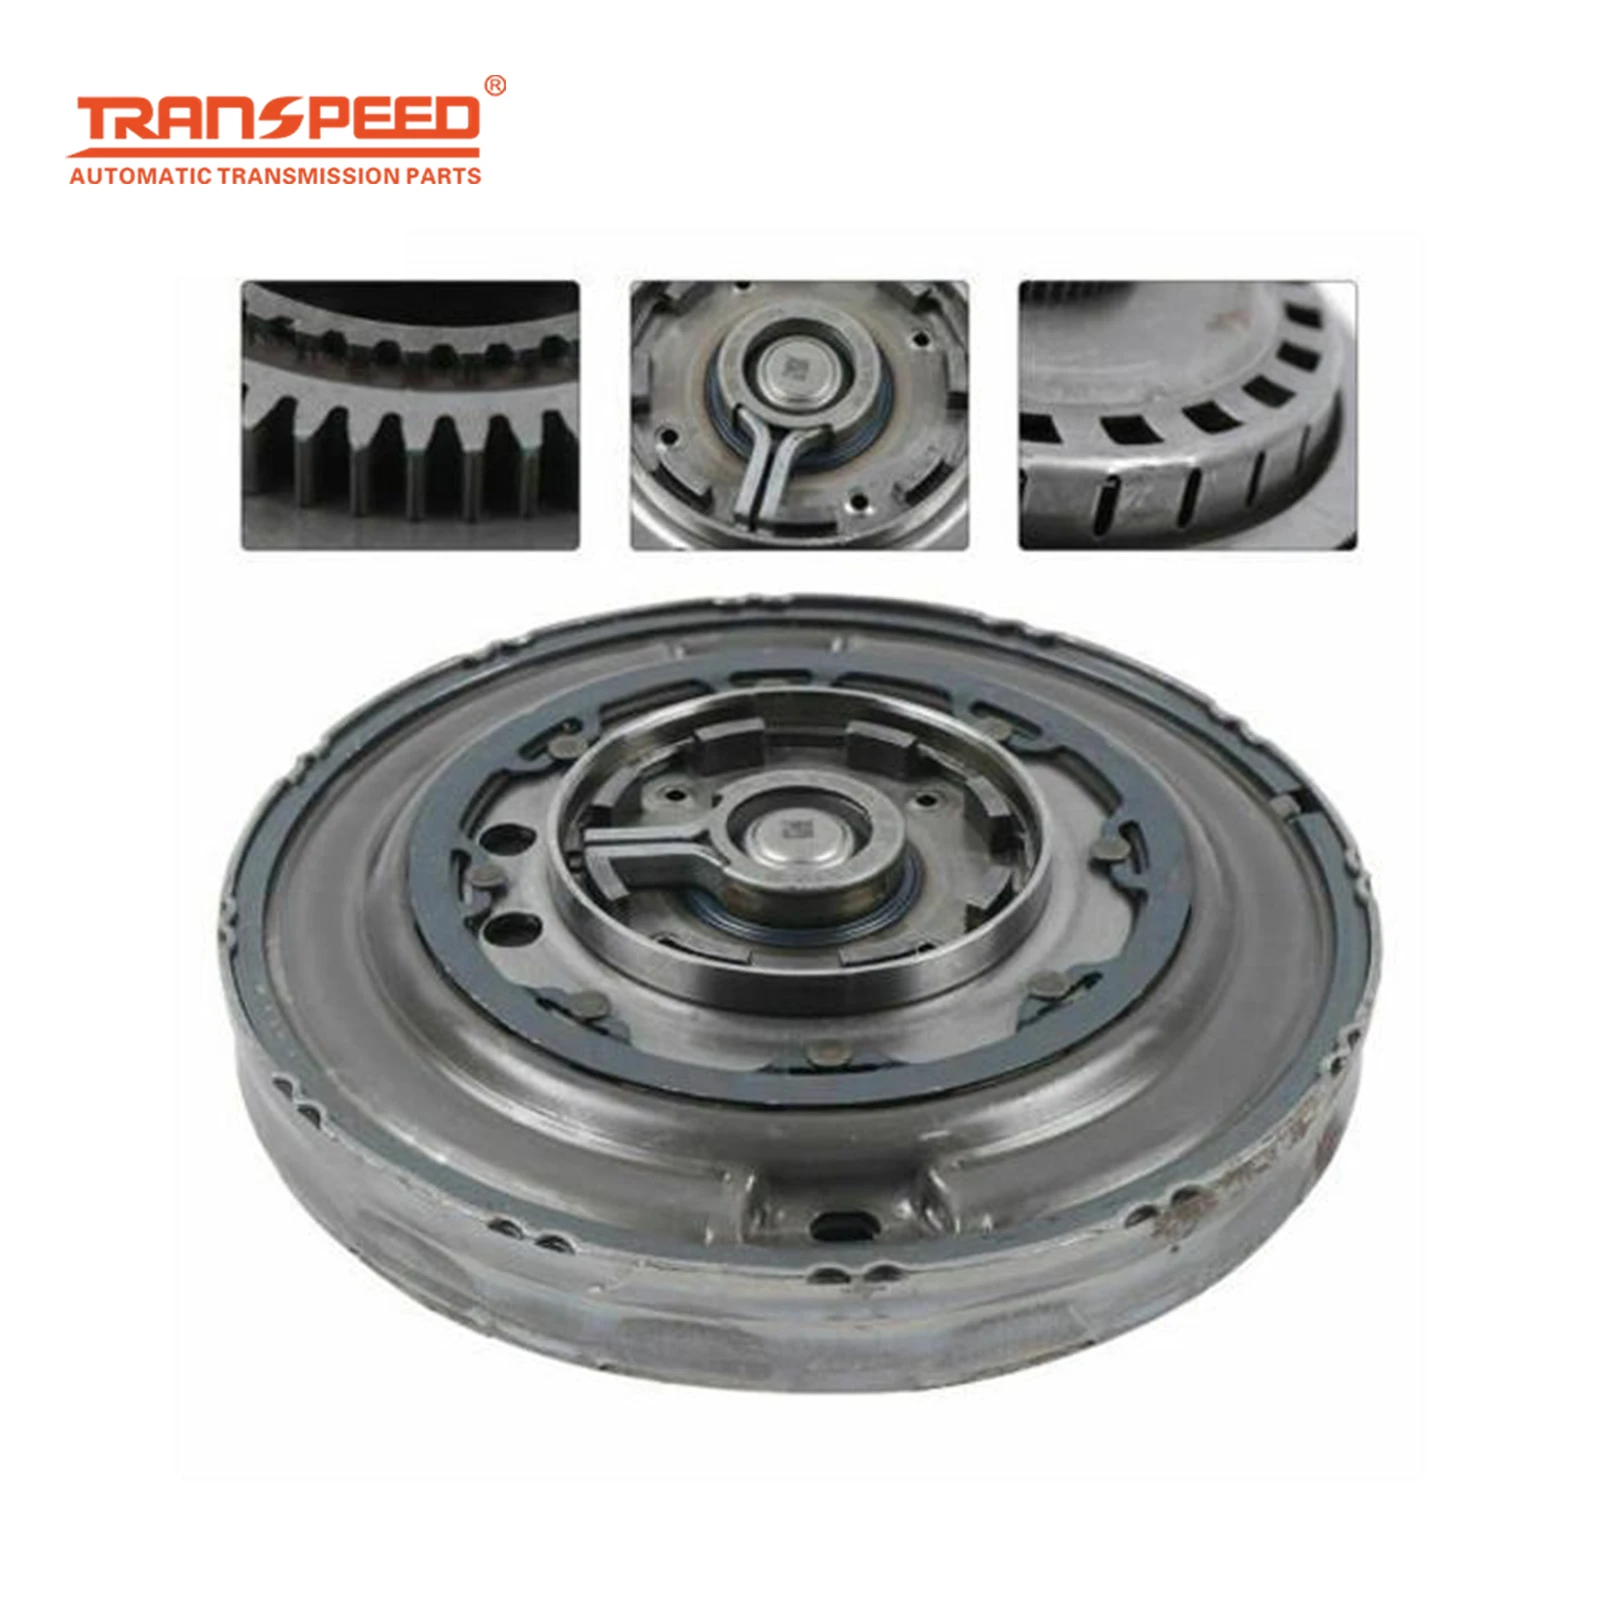 TRANSPEED MPS6 6DCT450 Automatic Transmission Gearbox Clutch Assembly